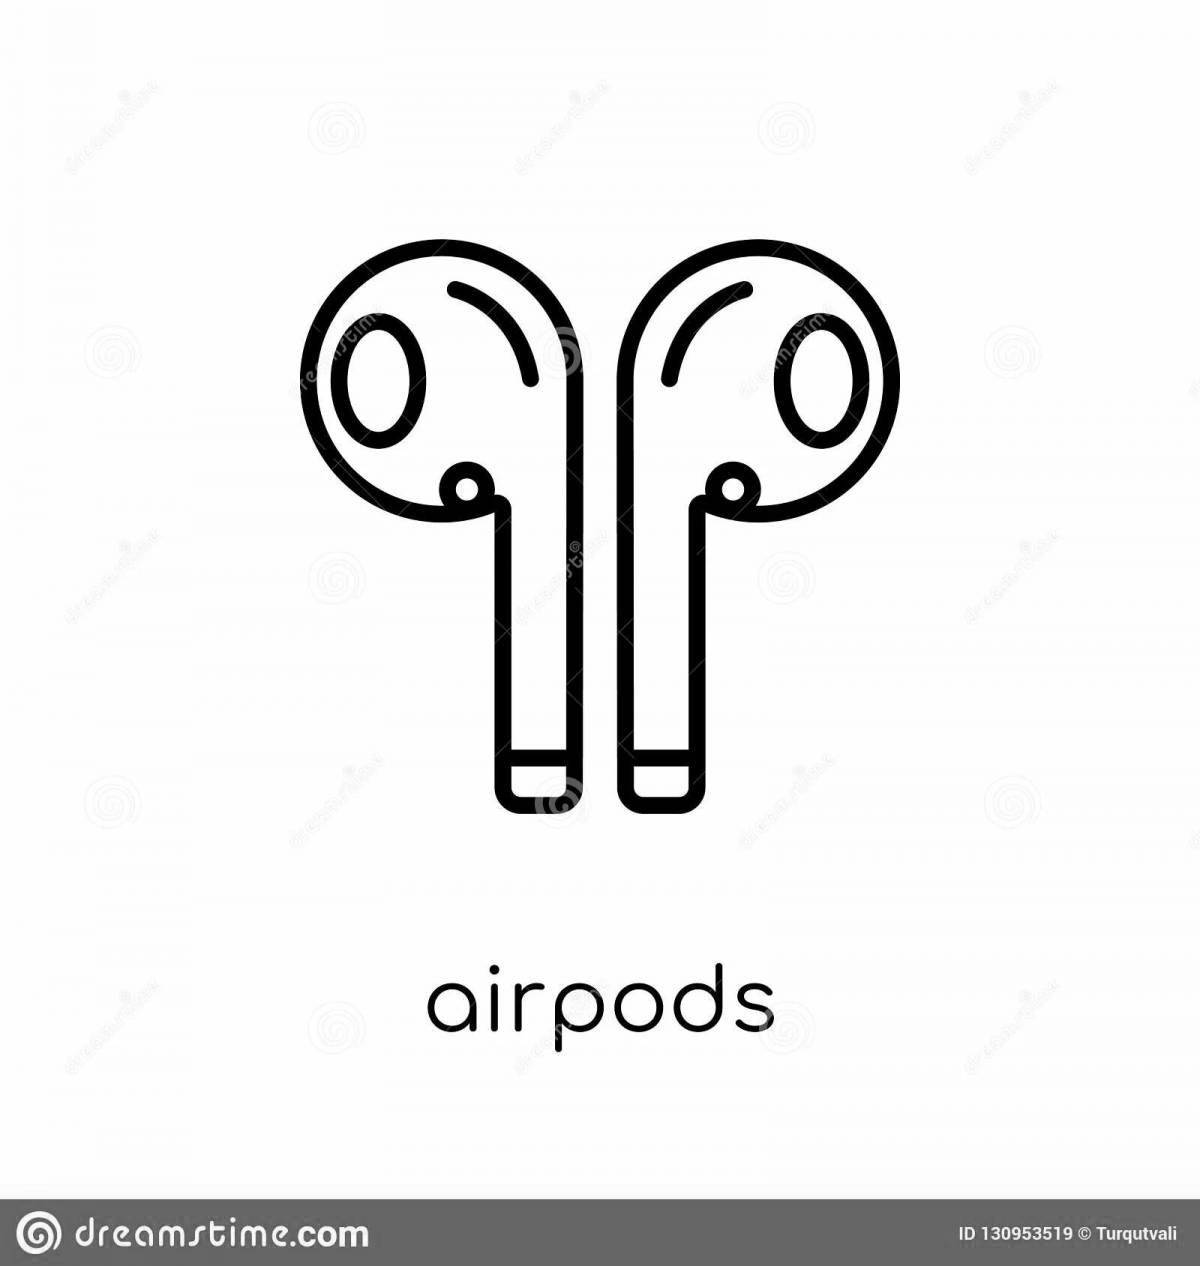 Airpods coloring book